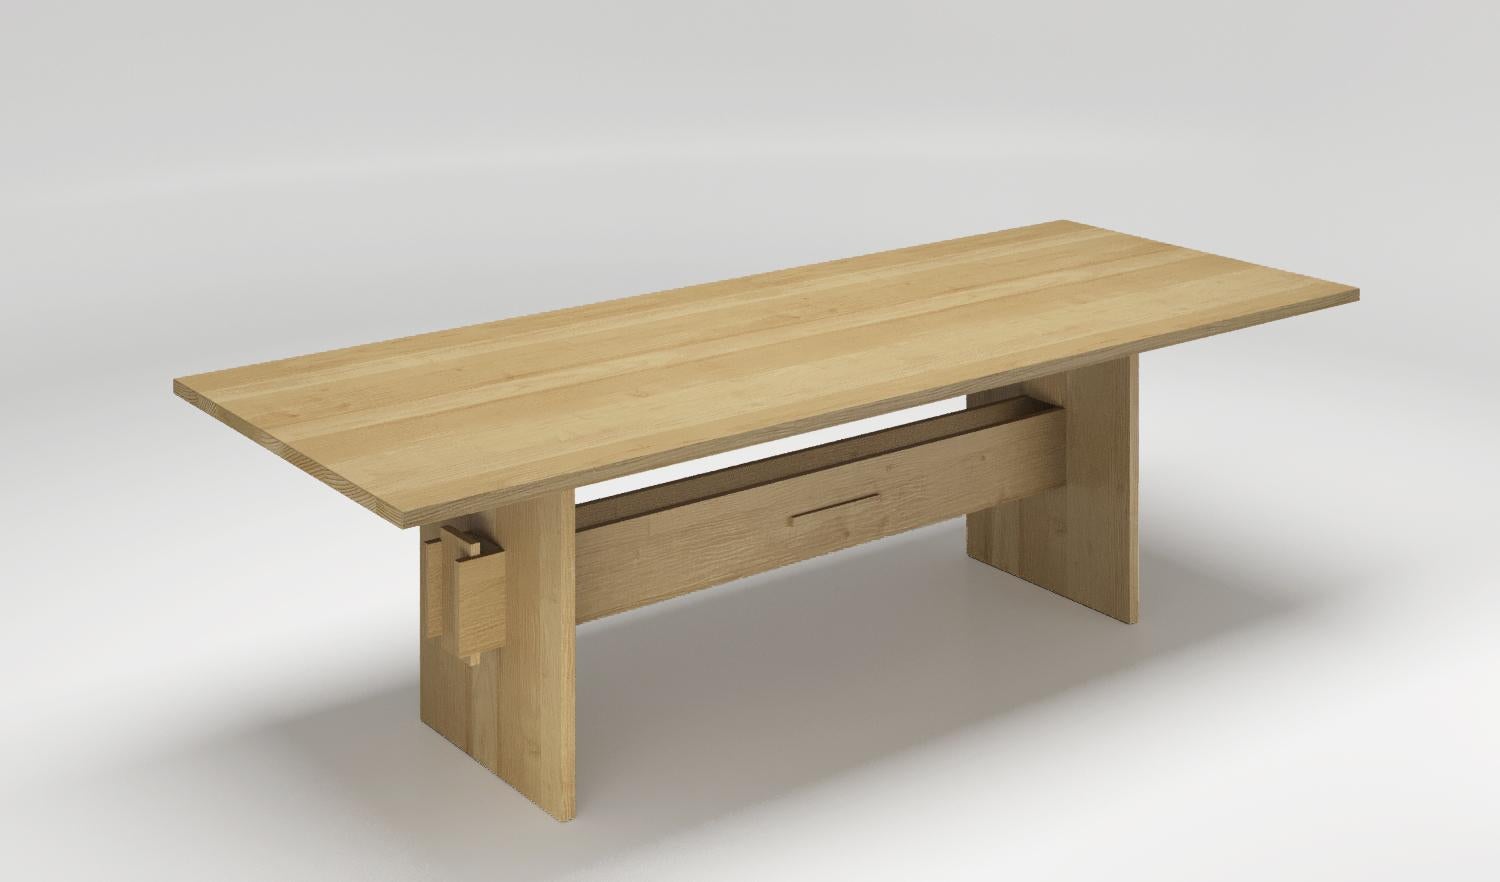 EPPE UTZON TABLE #2
Design by Jeppe Utzon, 2023

Sizes: 200, 240, 270, 300, 340 cm 
Finishes available : oak, smoked oak, walnut

Dimensions : H. 74 cm x W. 200 cm D. 100

--------
When the Danish architect and designer Jeppe Utzon drew the first